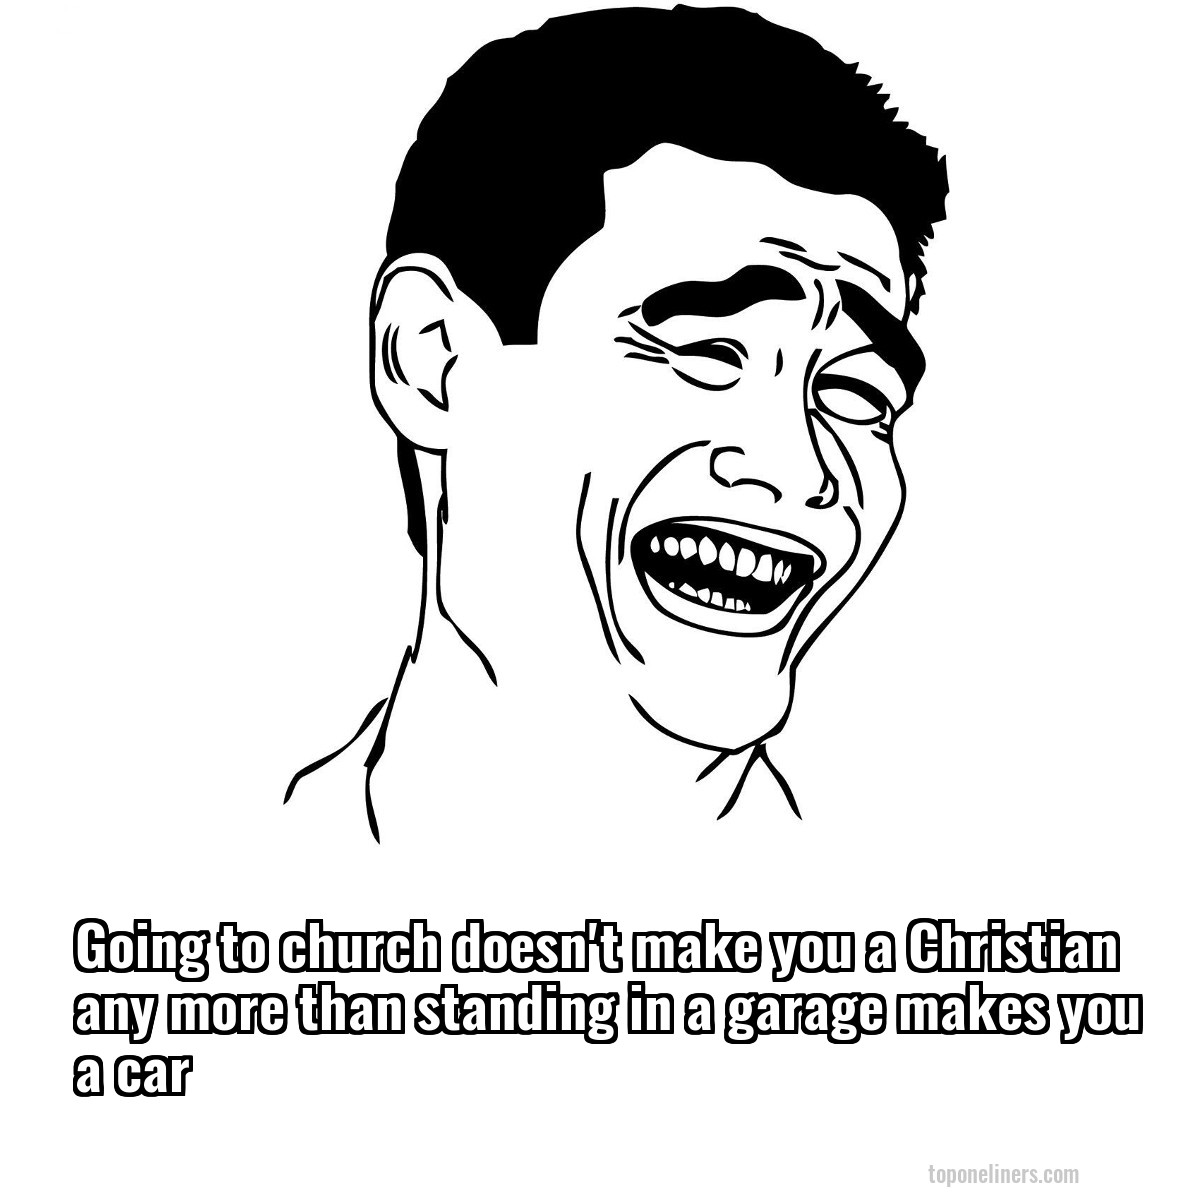 Going to church doesn't make you a Christian any more than standing in a garage makes you a car
